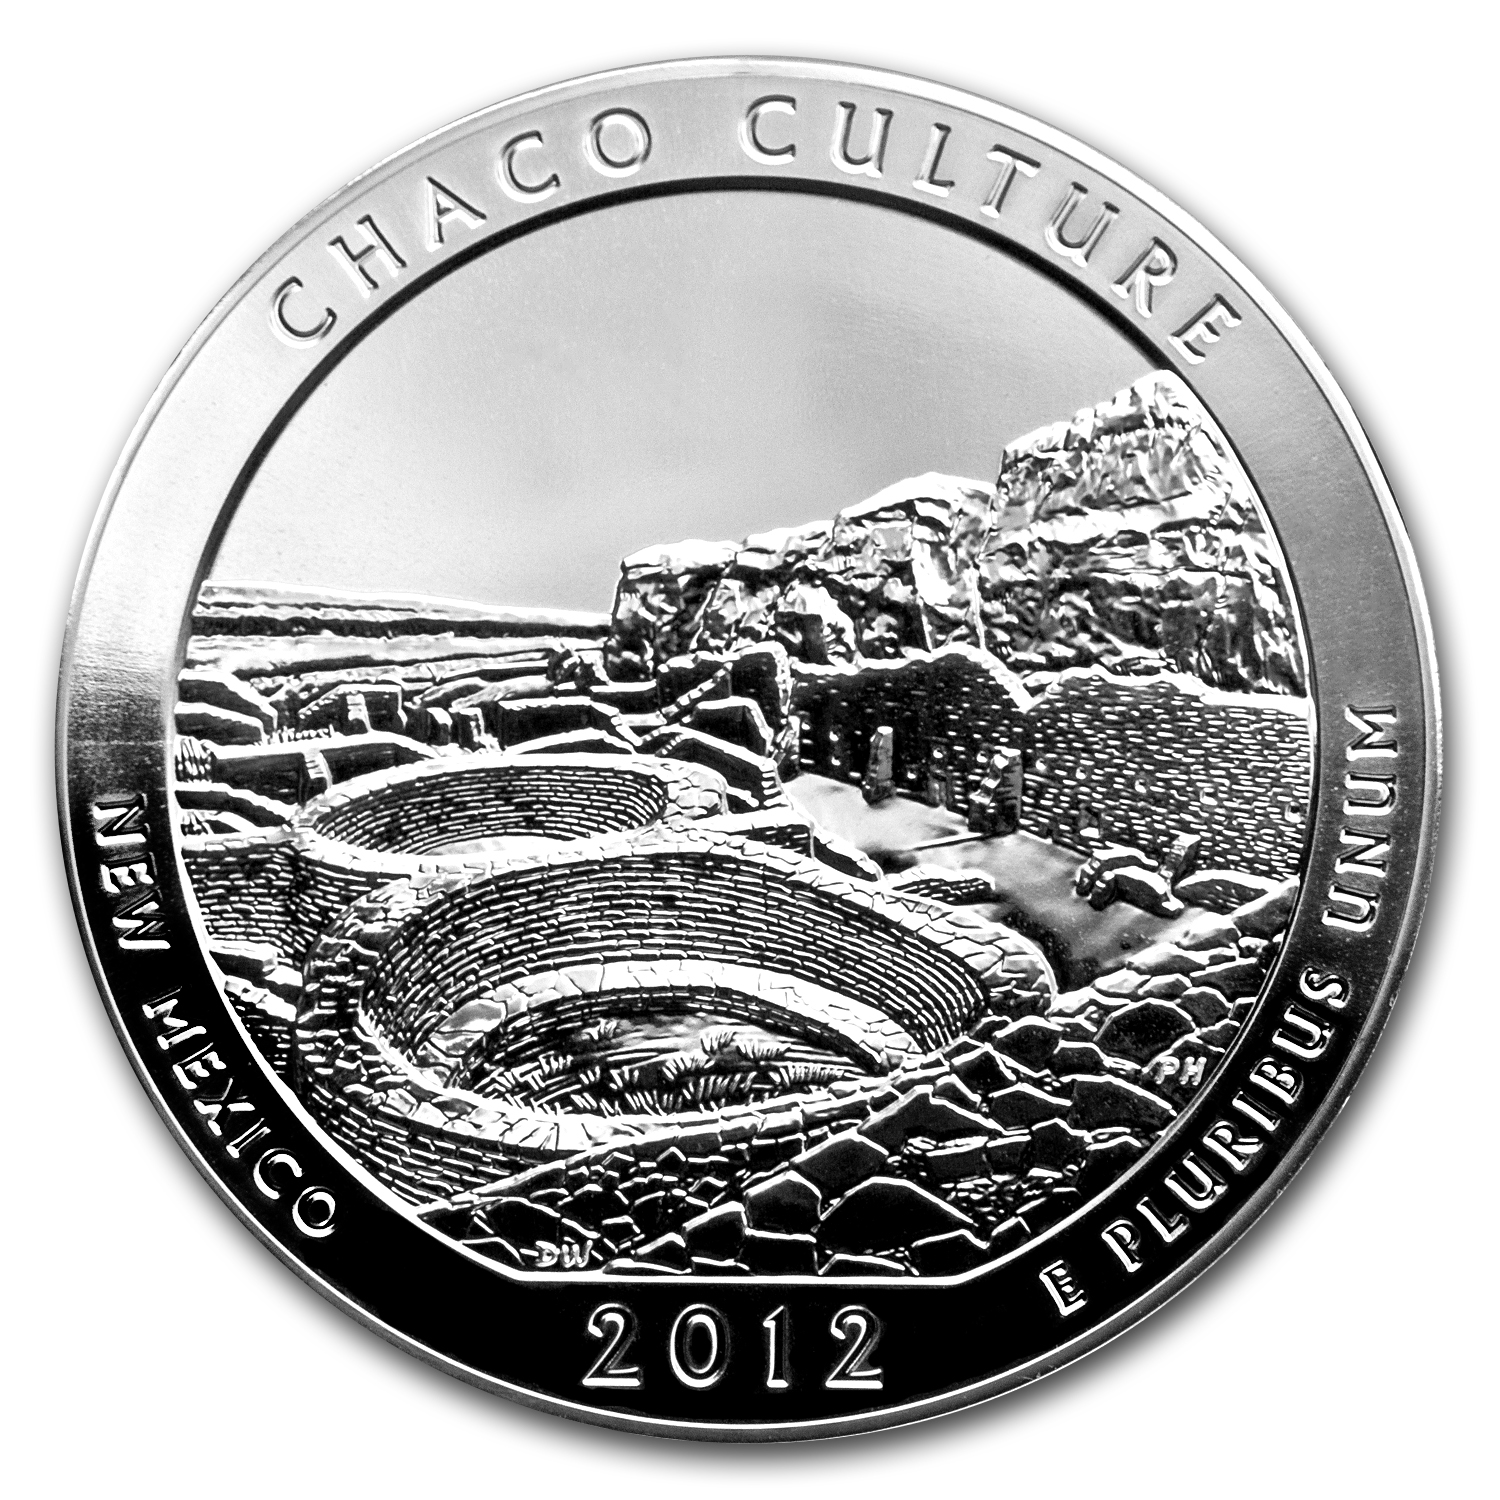 Buy 2012 5 oz Silver ATB Chaco Culture National Park, NM